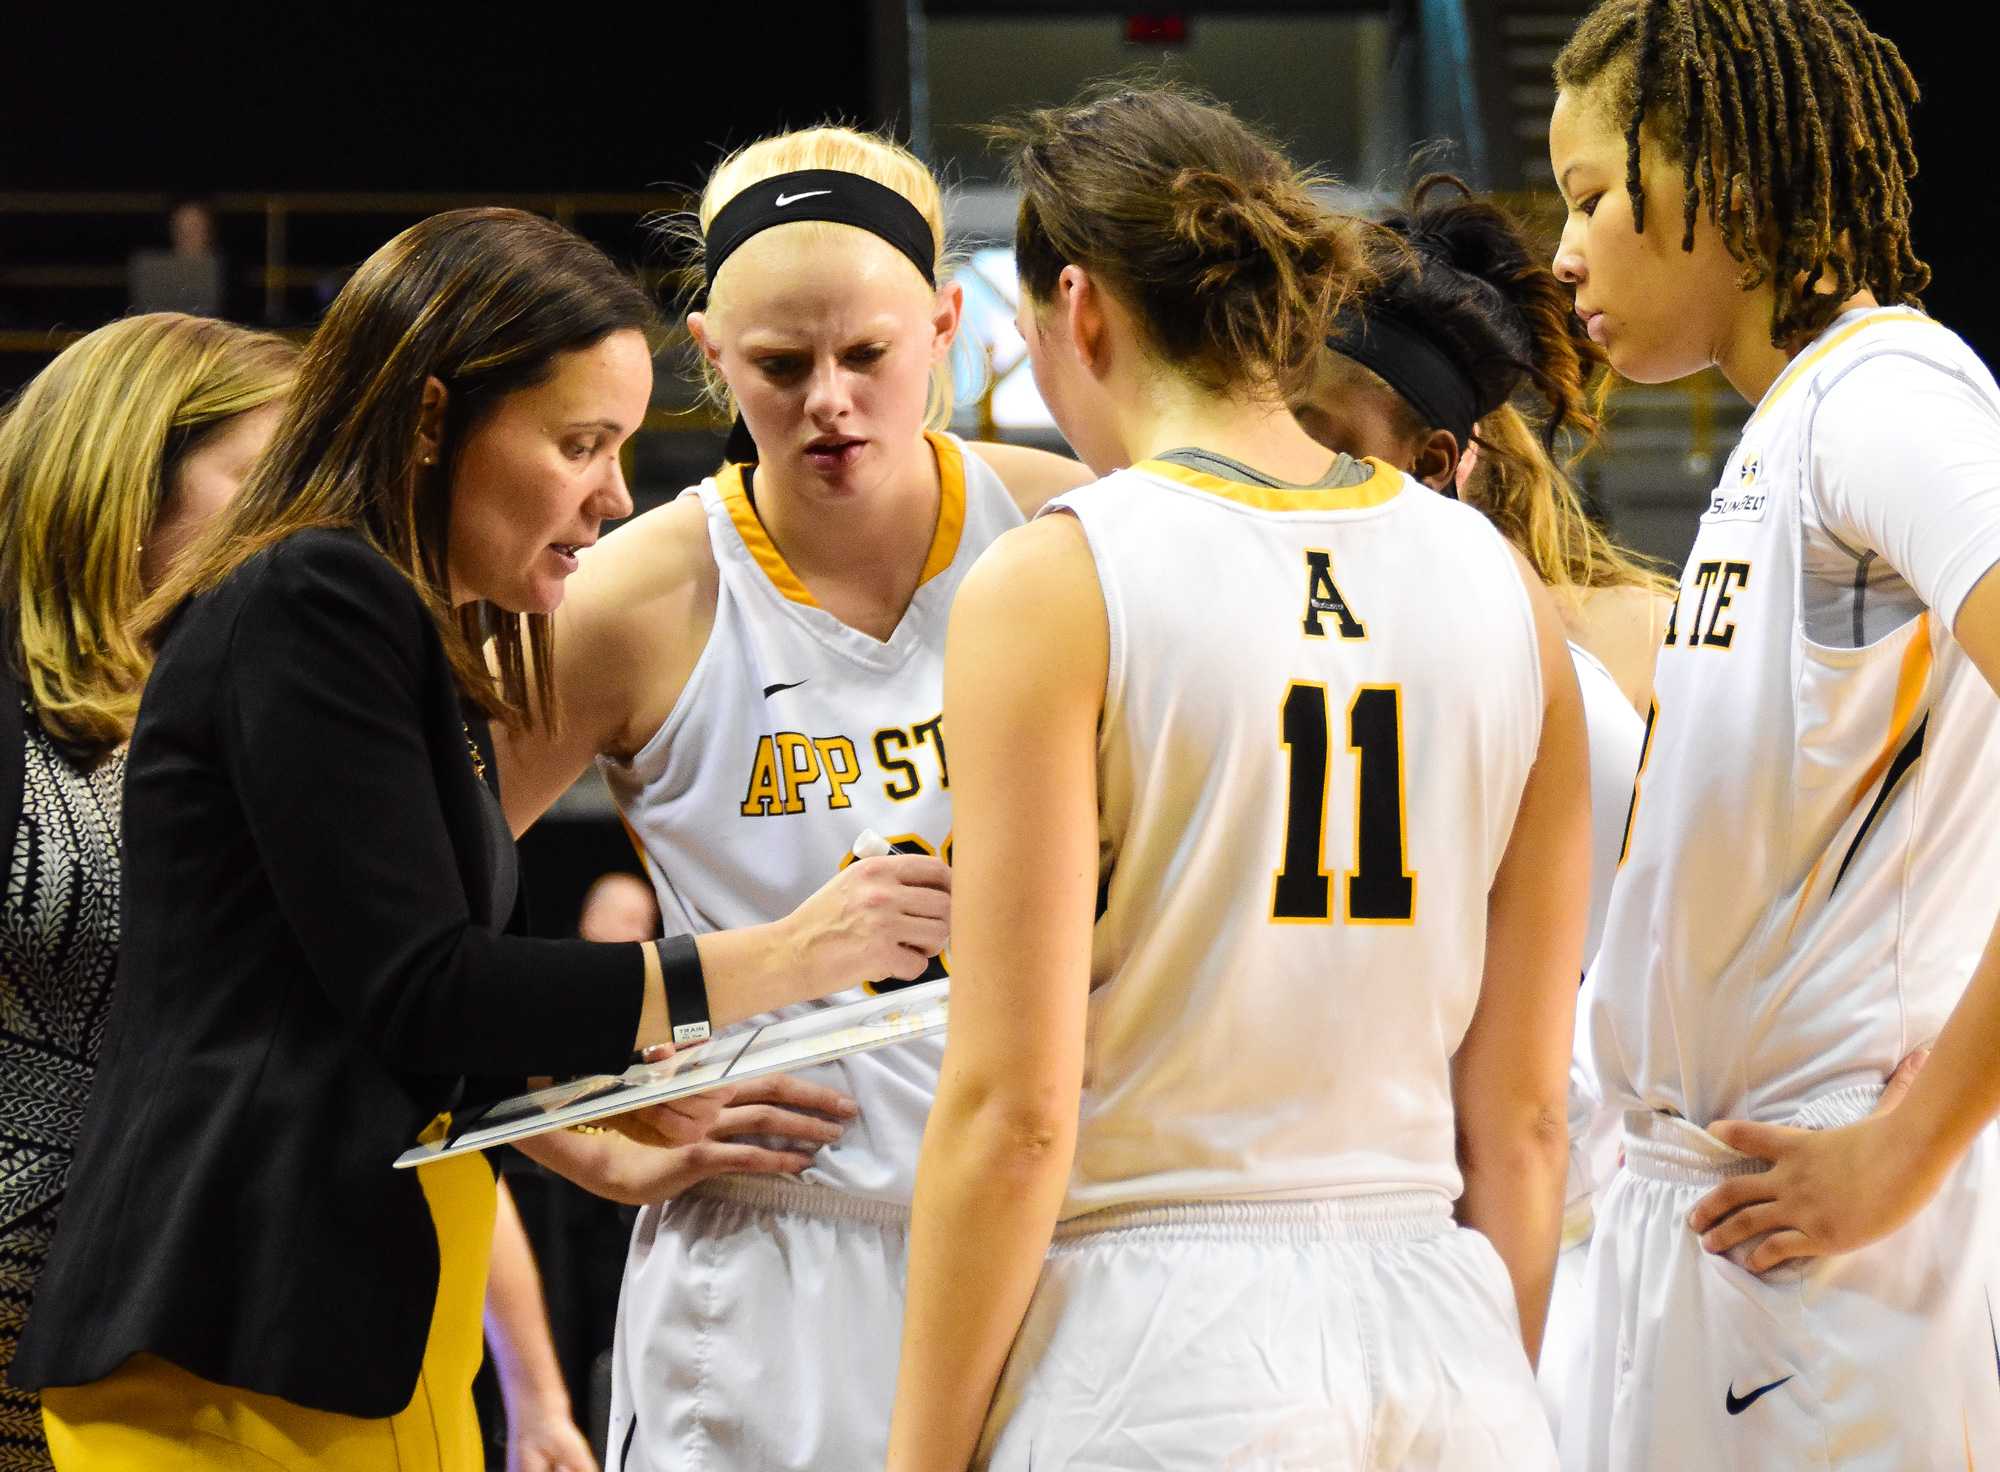 Womens+basketball+Coach+Angel+bringing+the+team+into+a+huddle+during+their+final+game+of+the+season+against+ASU+on+March+5th.+Photo+by+Lee+Sanderlin.